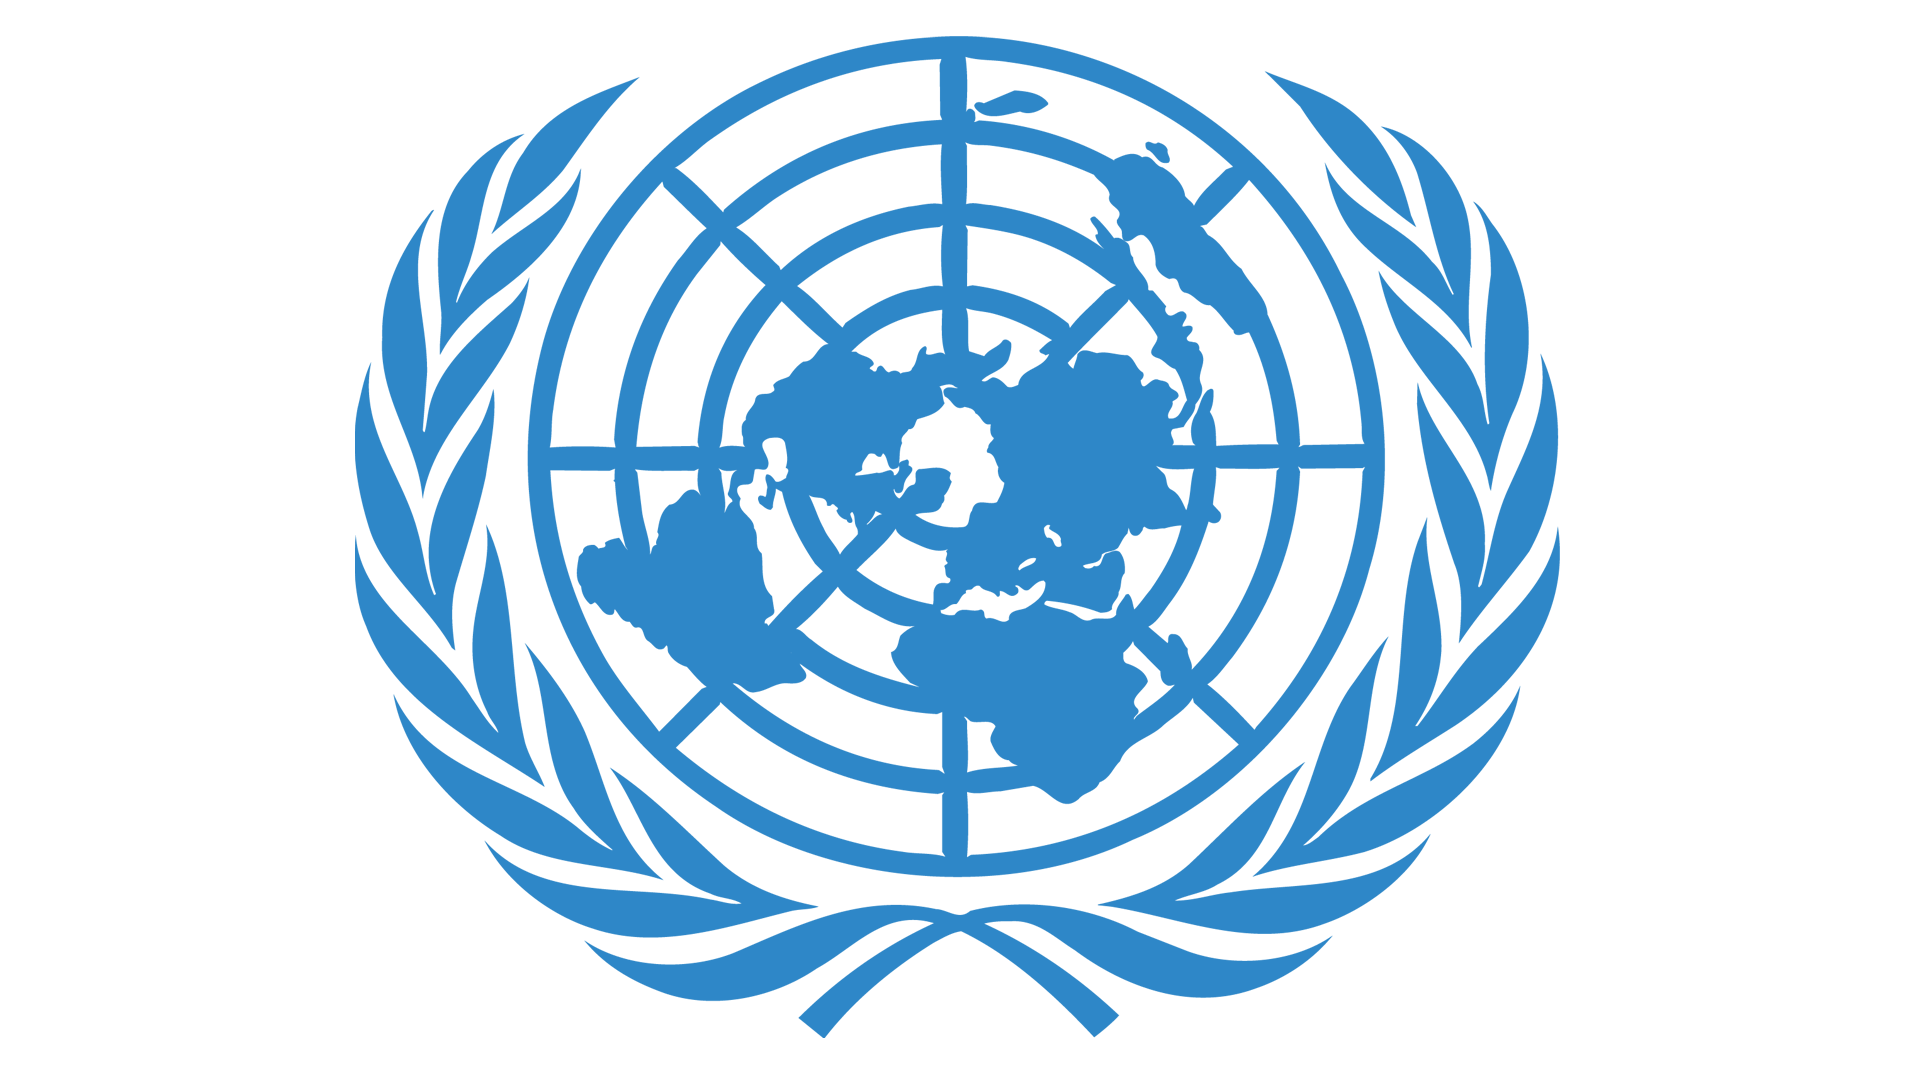 United Nations Logo - United Nations Logo, United Nations Symbol, Meaning, History